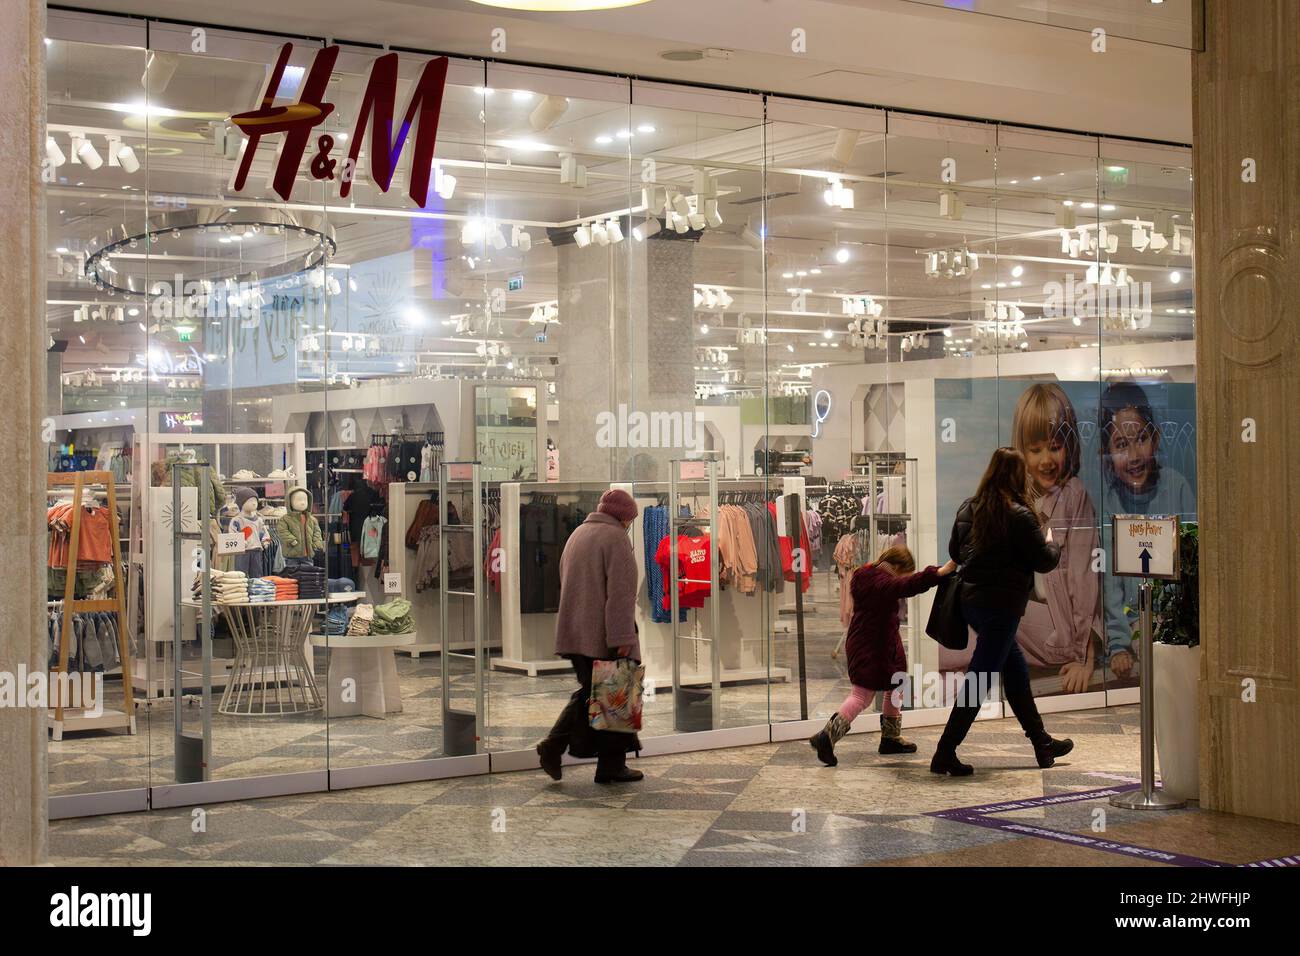 Shoppers pass by closed doors of the H&M fashion outlet in Moscow. H&M  closed its boutiques in Russia in light of the countryís military conflict  with neighboring Ukraine. (Photo by Vlad Karkov /